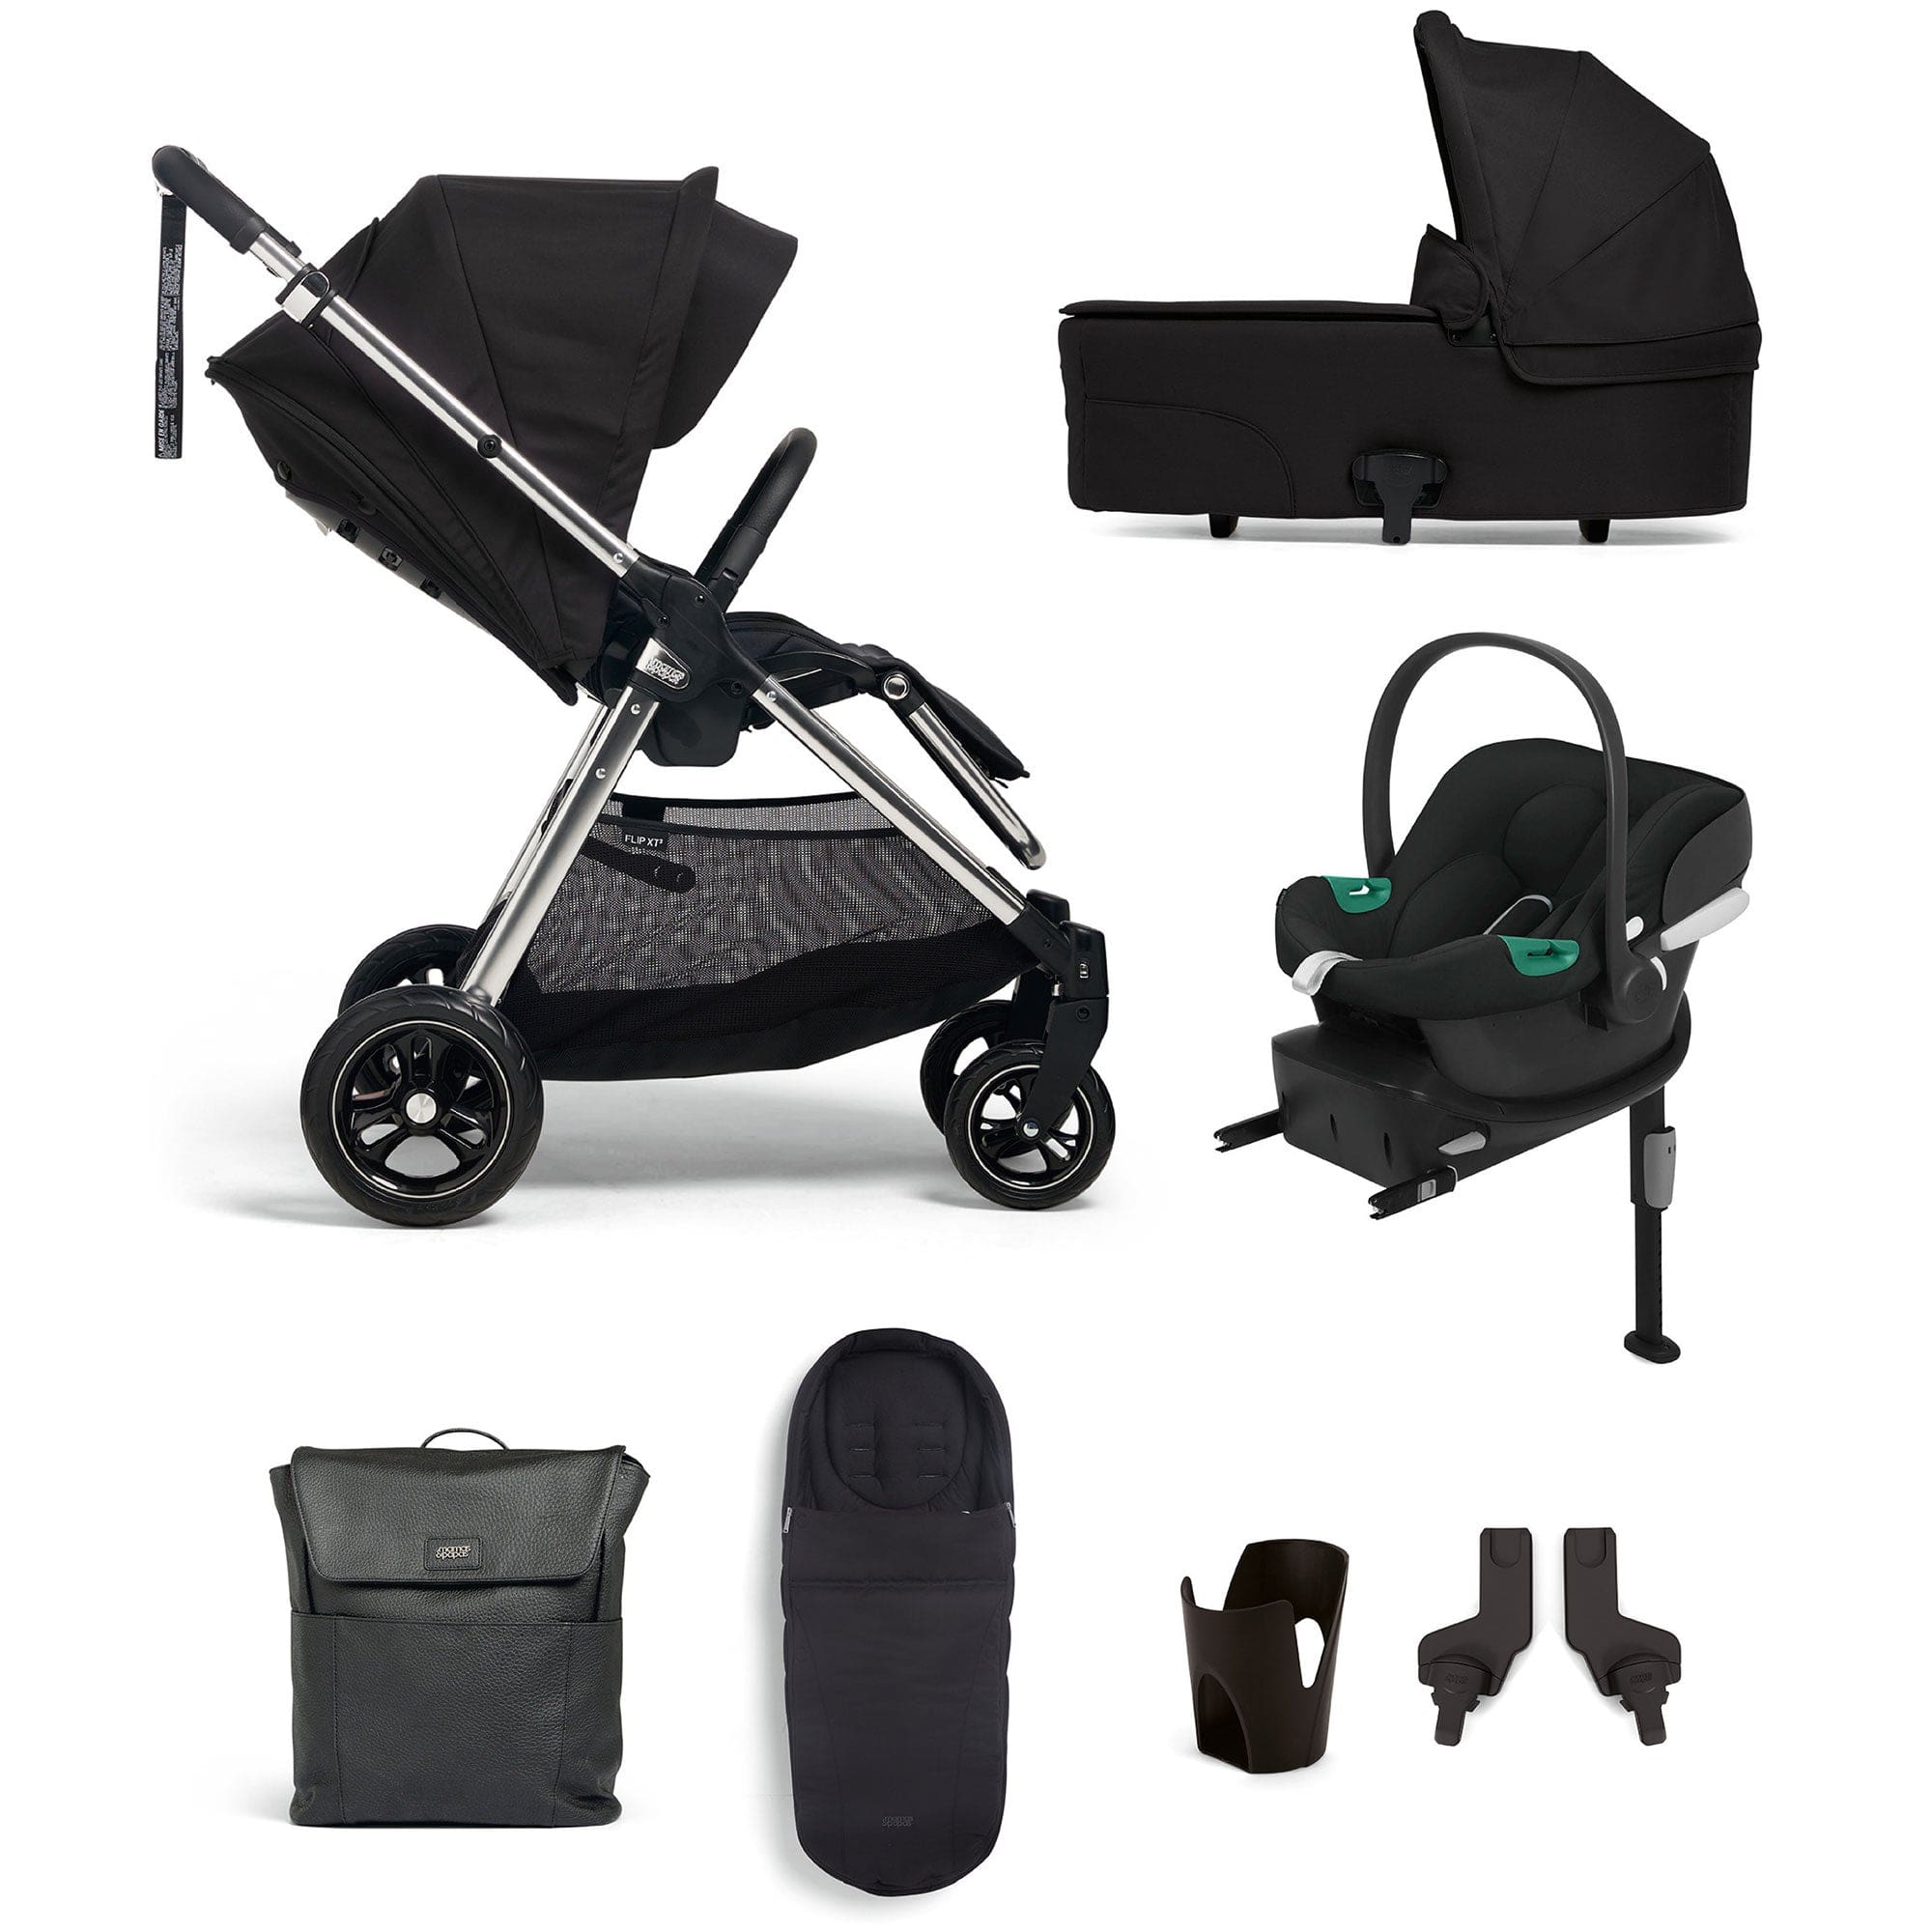 Mamas & Papas Flip XT³ 8 Piece Essentials Bundle with Car Seat in Slated Navy Travel Systems 61941SN00 5063229087479